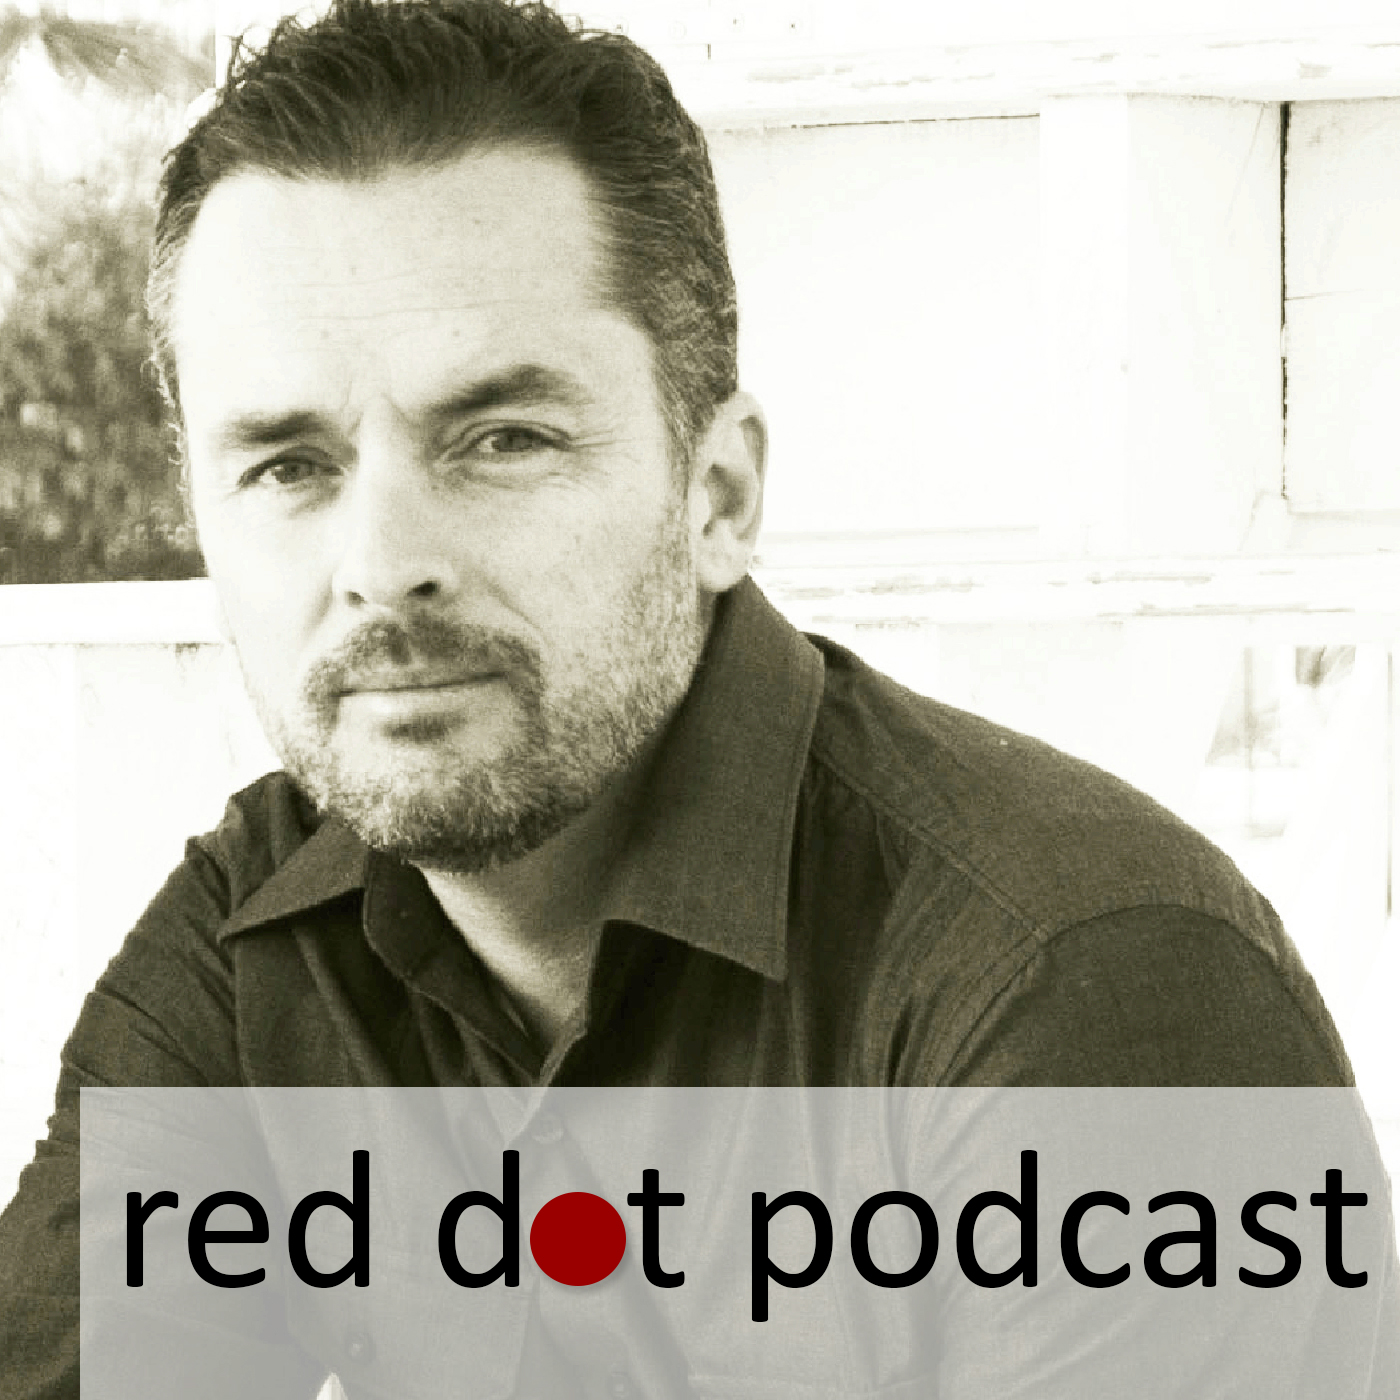 RedDot Podcast | Episode 010 | Ask a Gallery Owner - Expanding Gallery Representation, Converting Interest into Art Sales, Re-branding Your Art